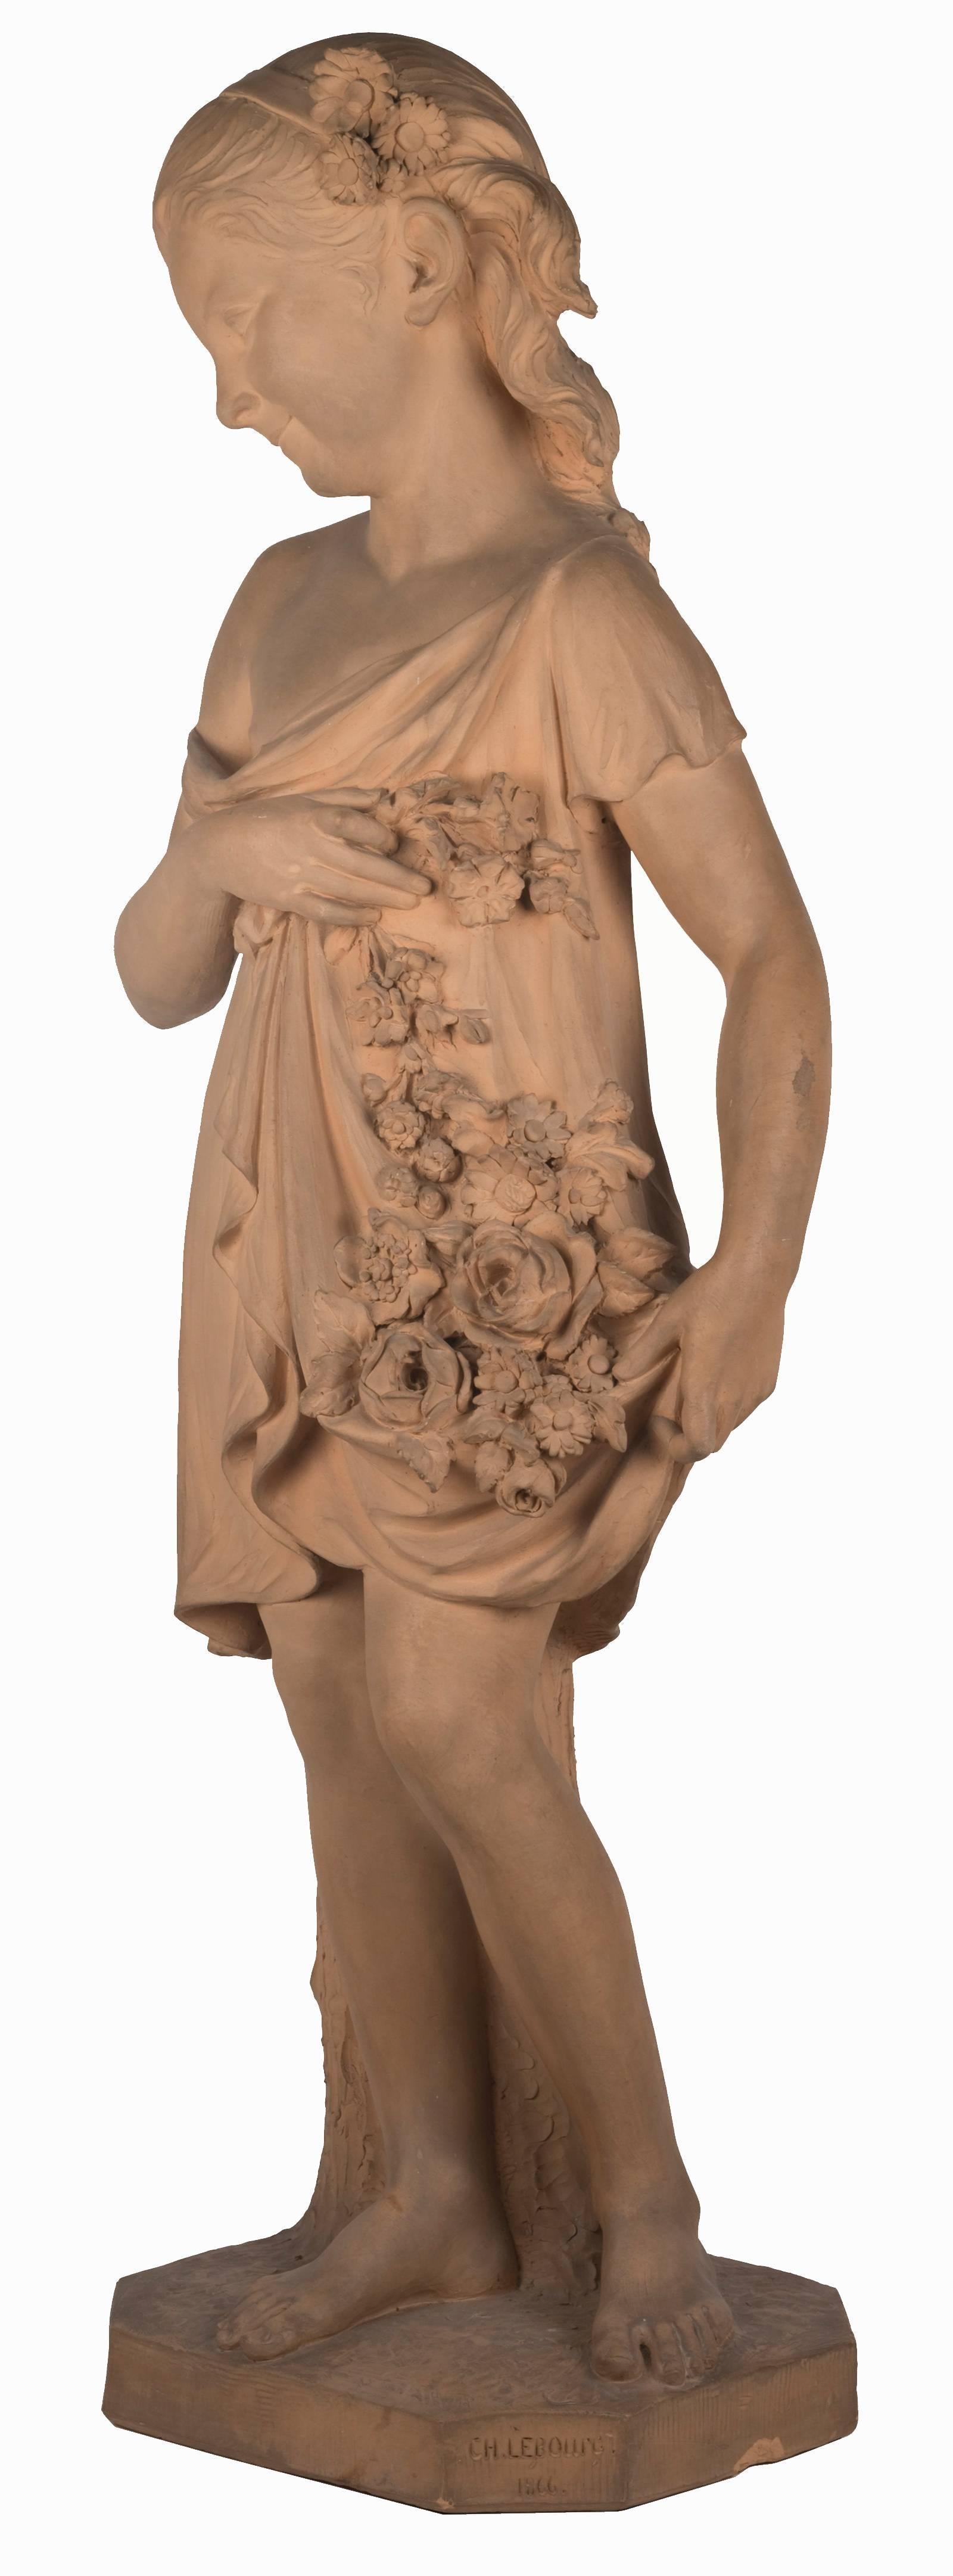 An 19th century French terracotta statue of a young girl, the standing figure in delicately carved drapery leaning against a tree stump with a garland of flowers at her side. The pedestal is incised, CH. Le Bourg 1866.

Charles Lebourg (1829 -